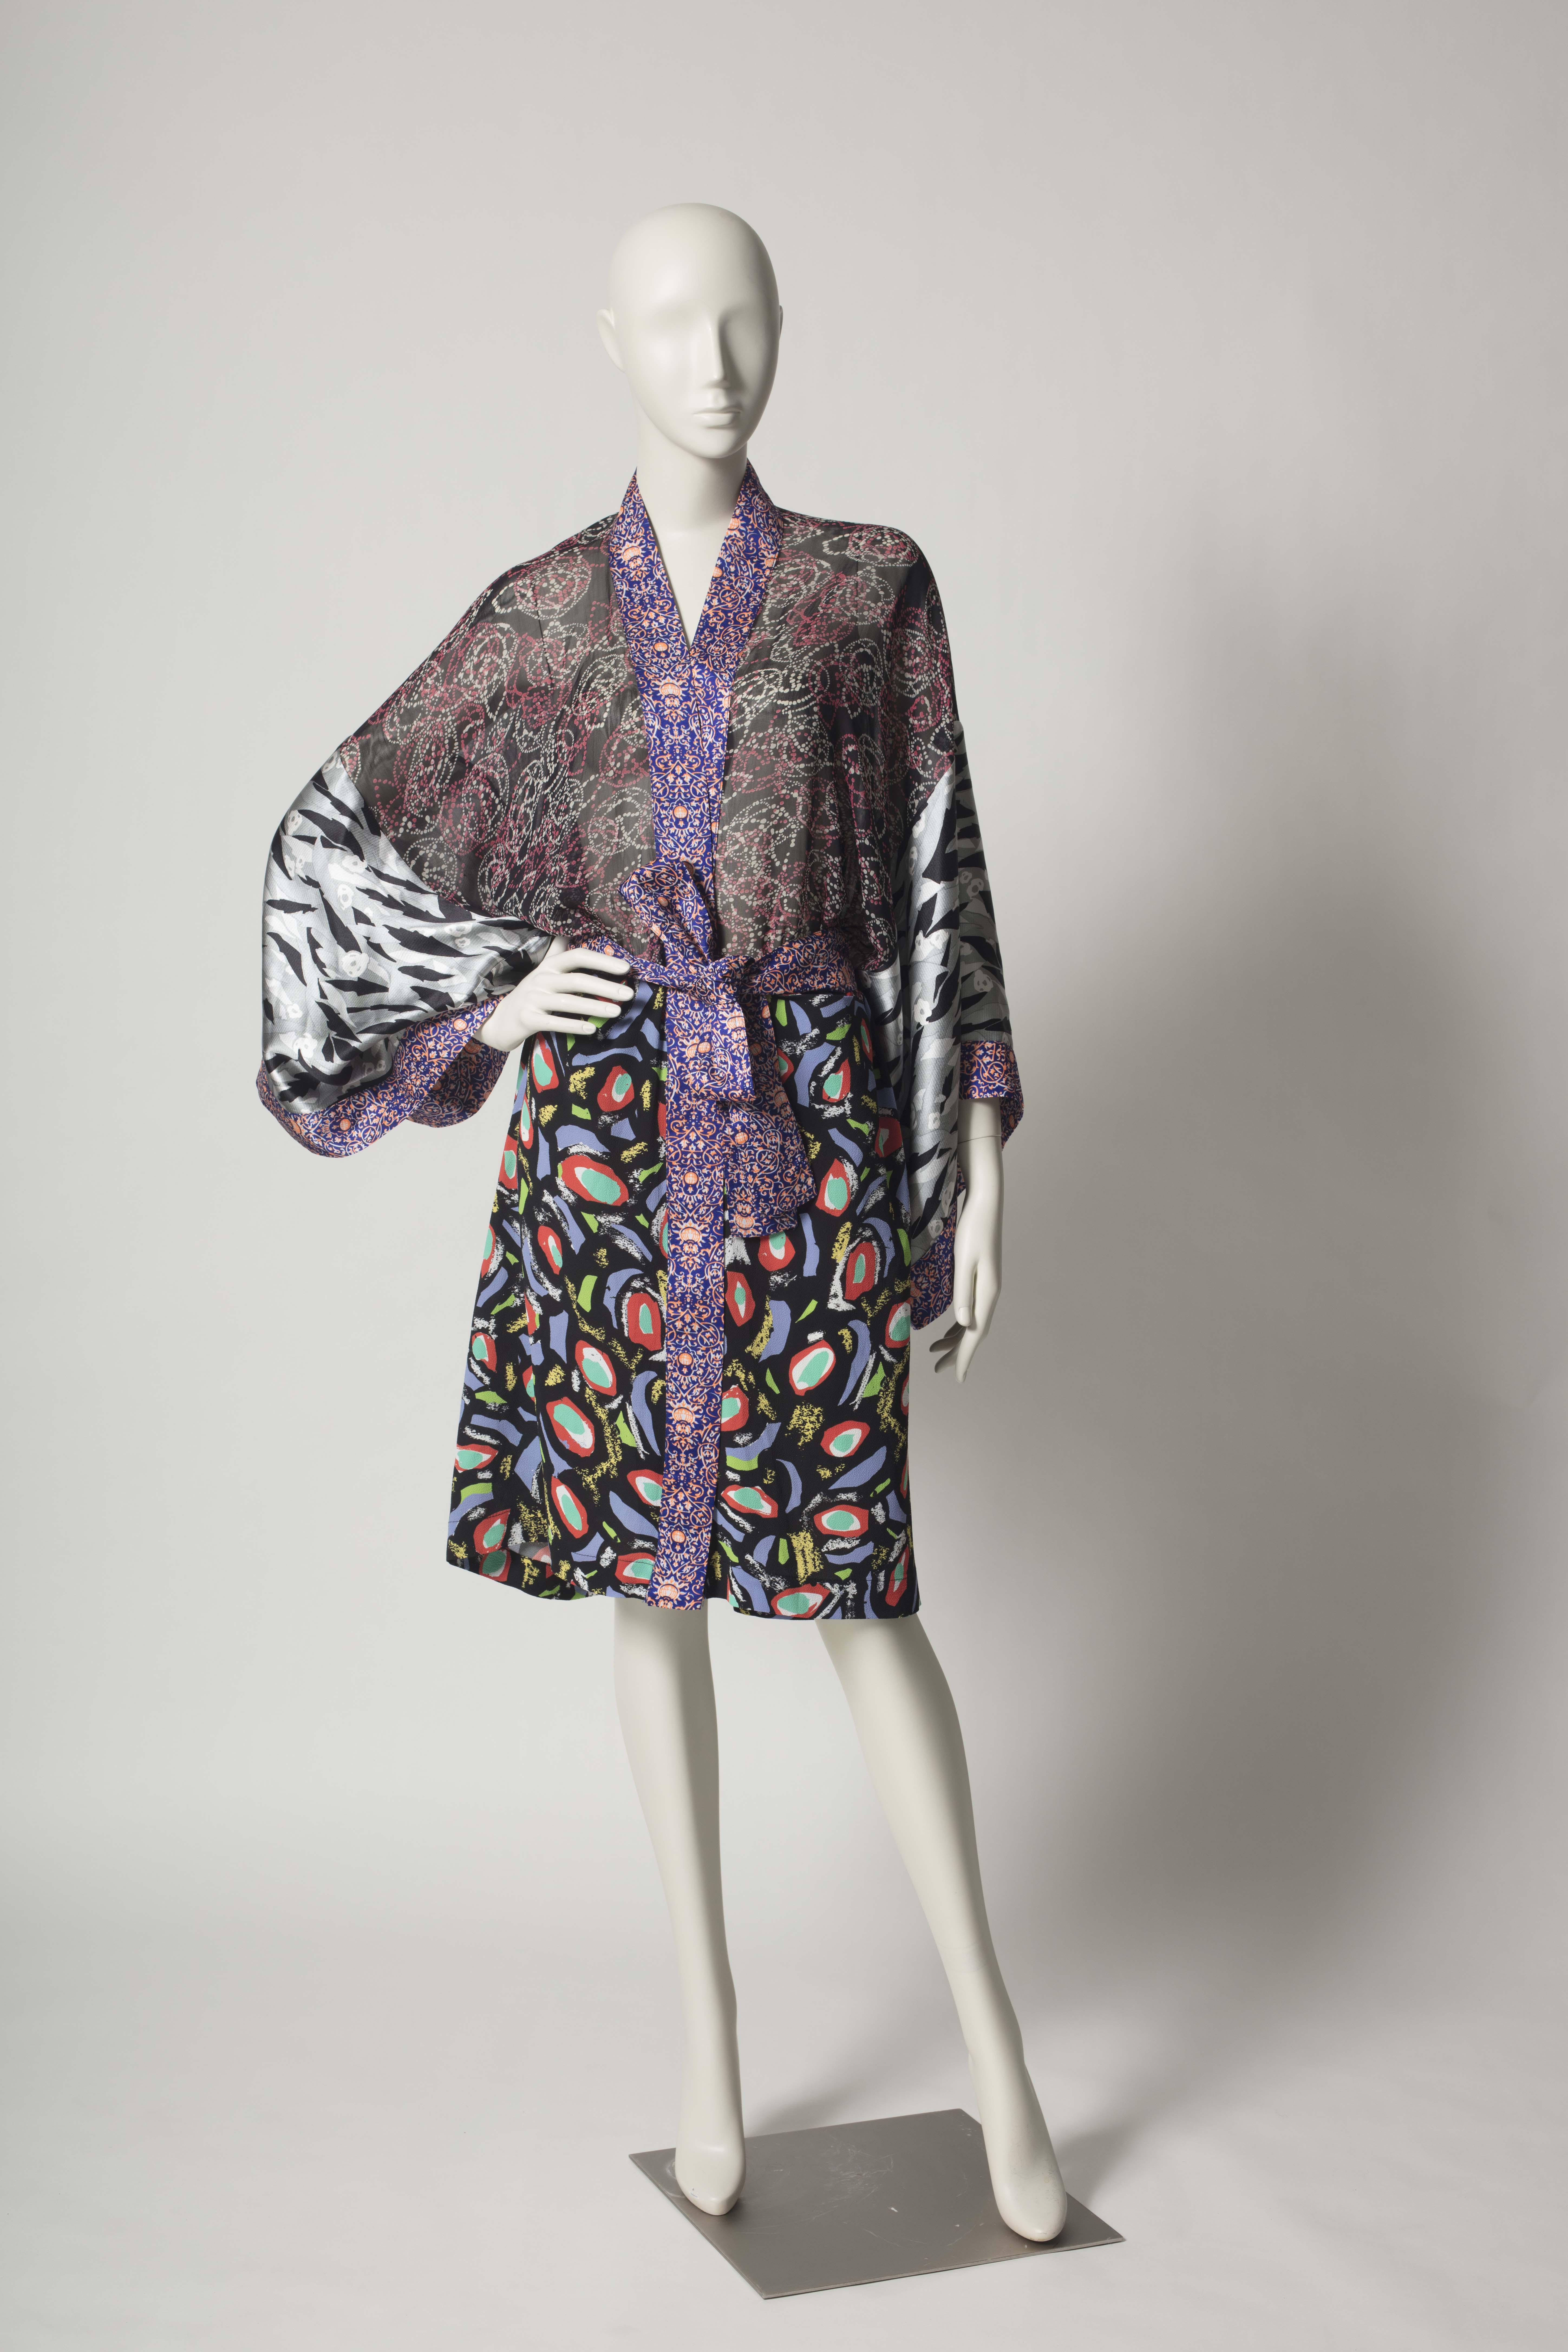 The exhibition “Reimagining the Kimono,” presented by the Texas Fashion Collecti